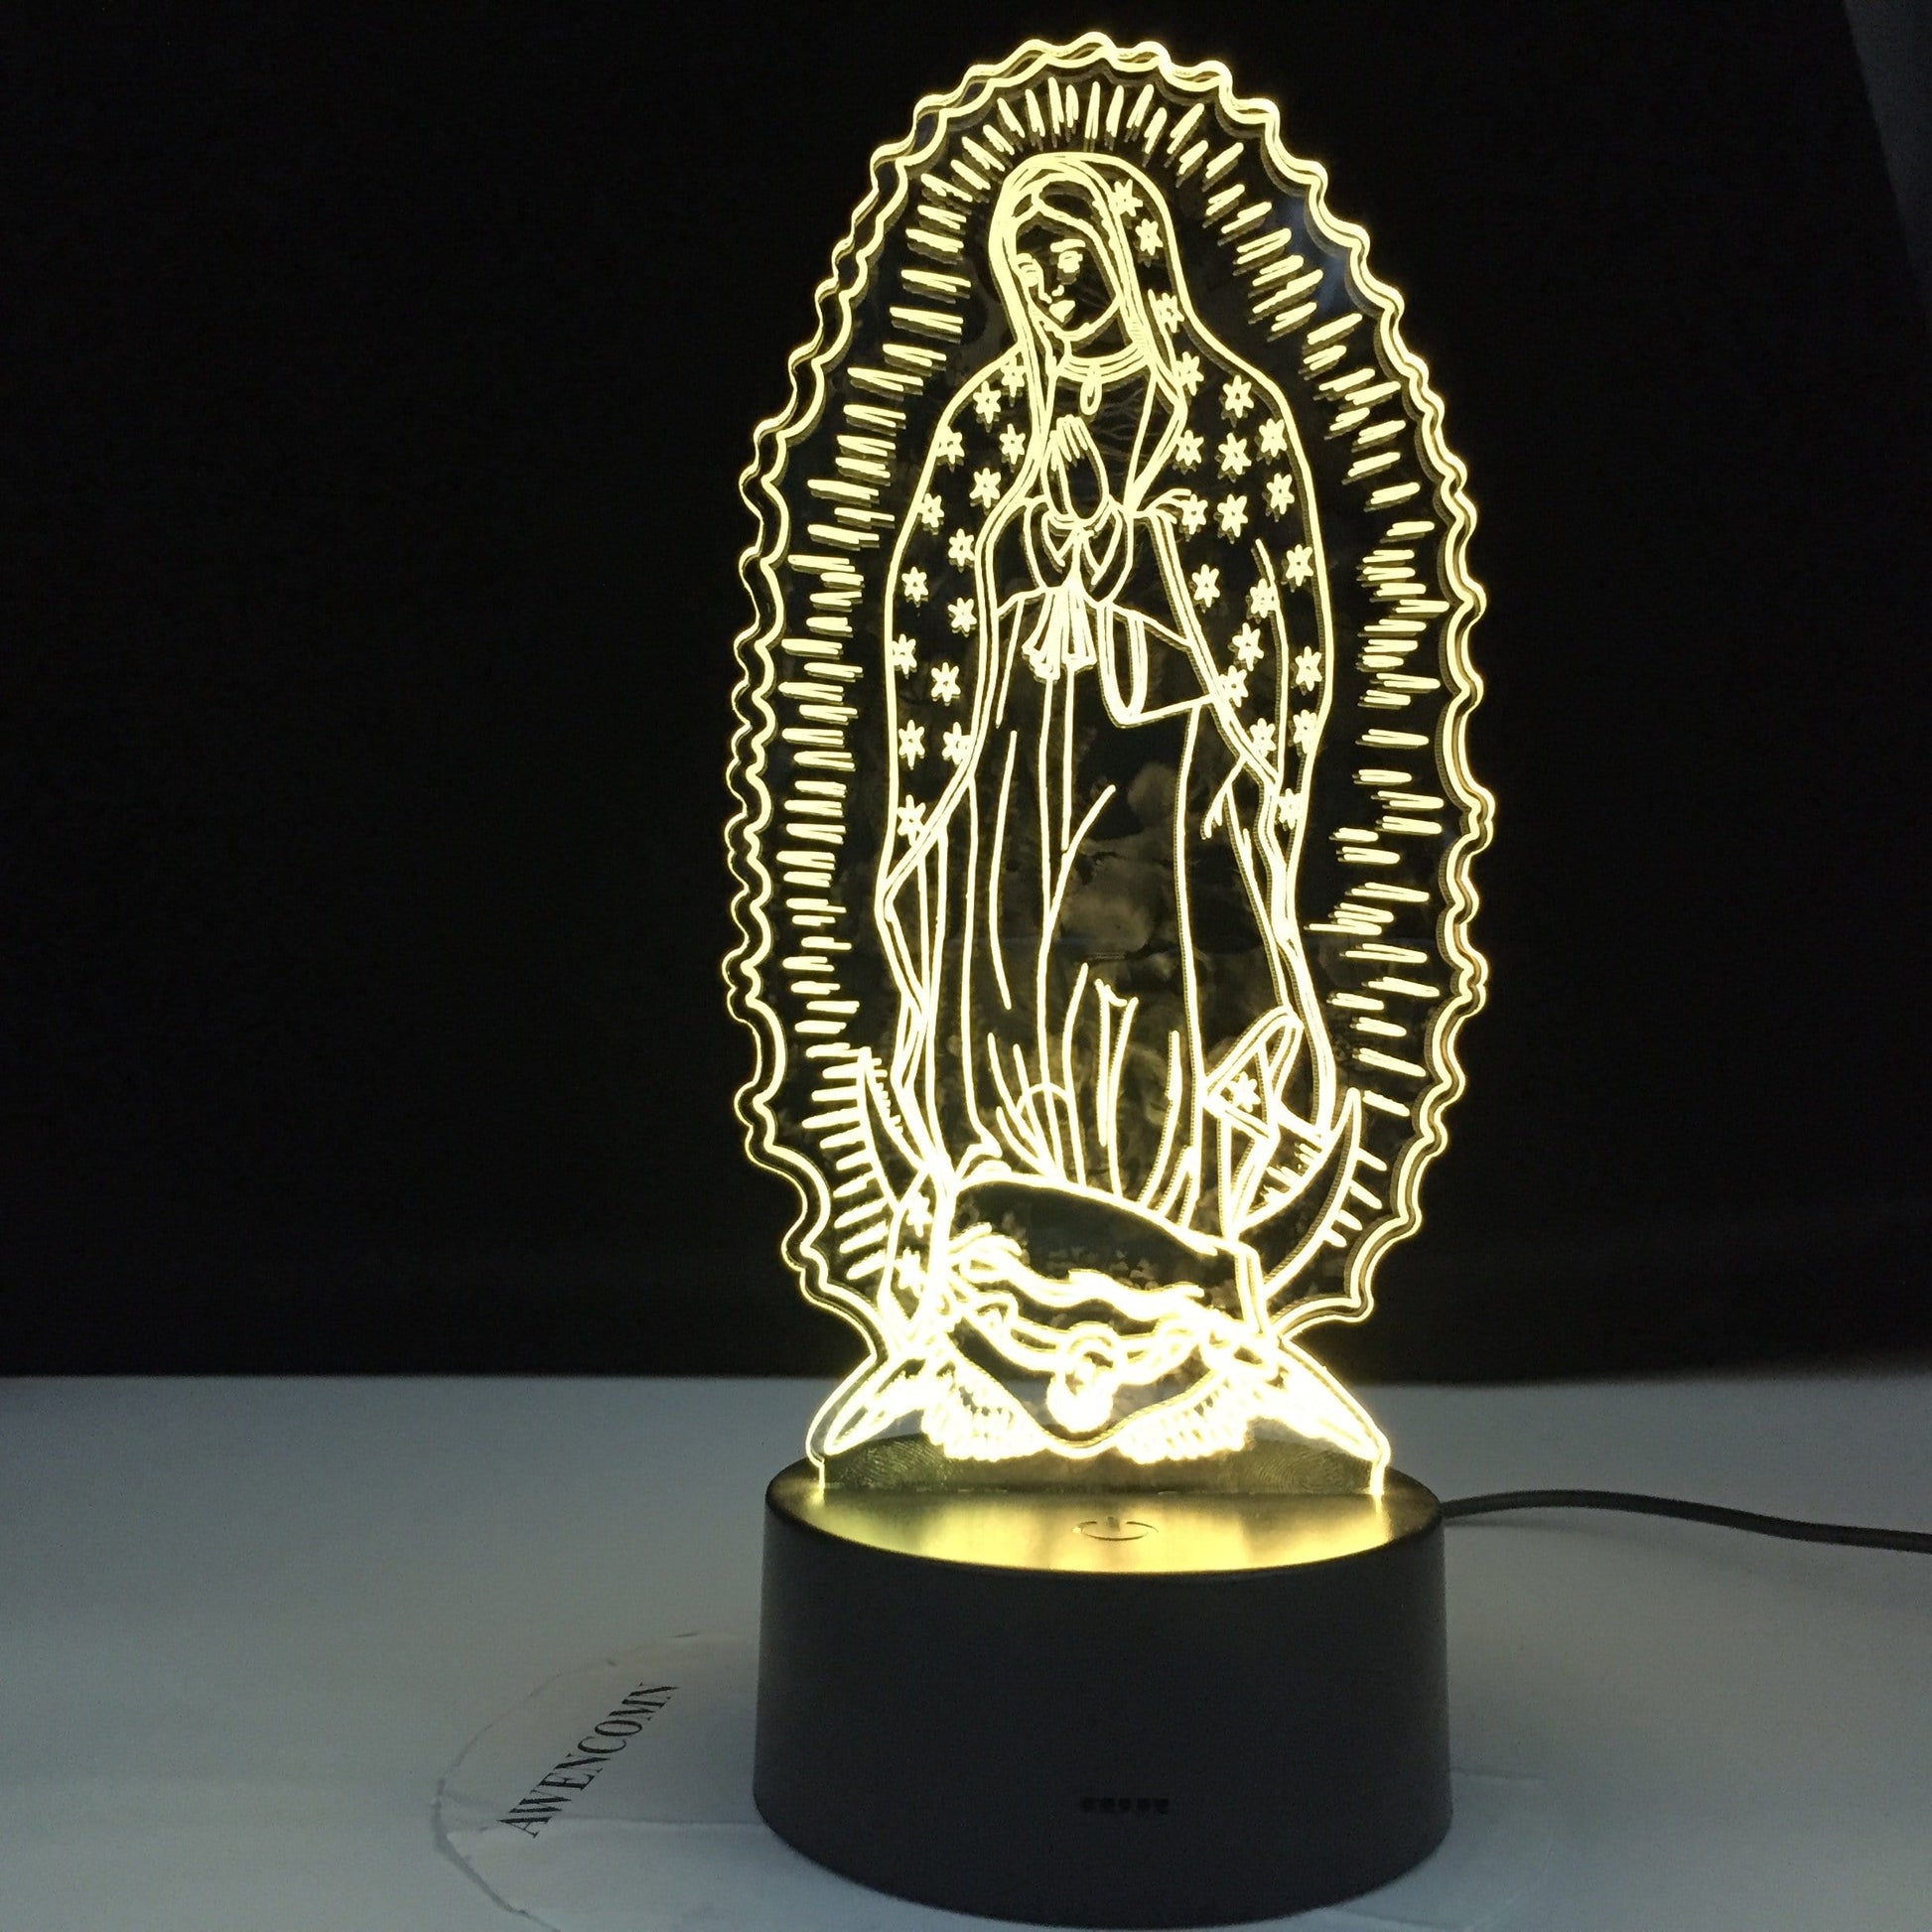 Christian Lamp Virgin Mary 3D Illusion Lamp - Christian Night Light - Christian Home Decor - Christian Easter Gifts